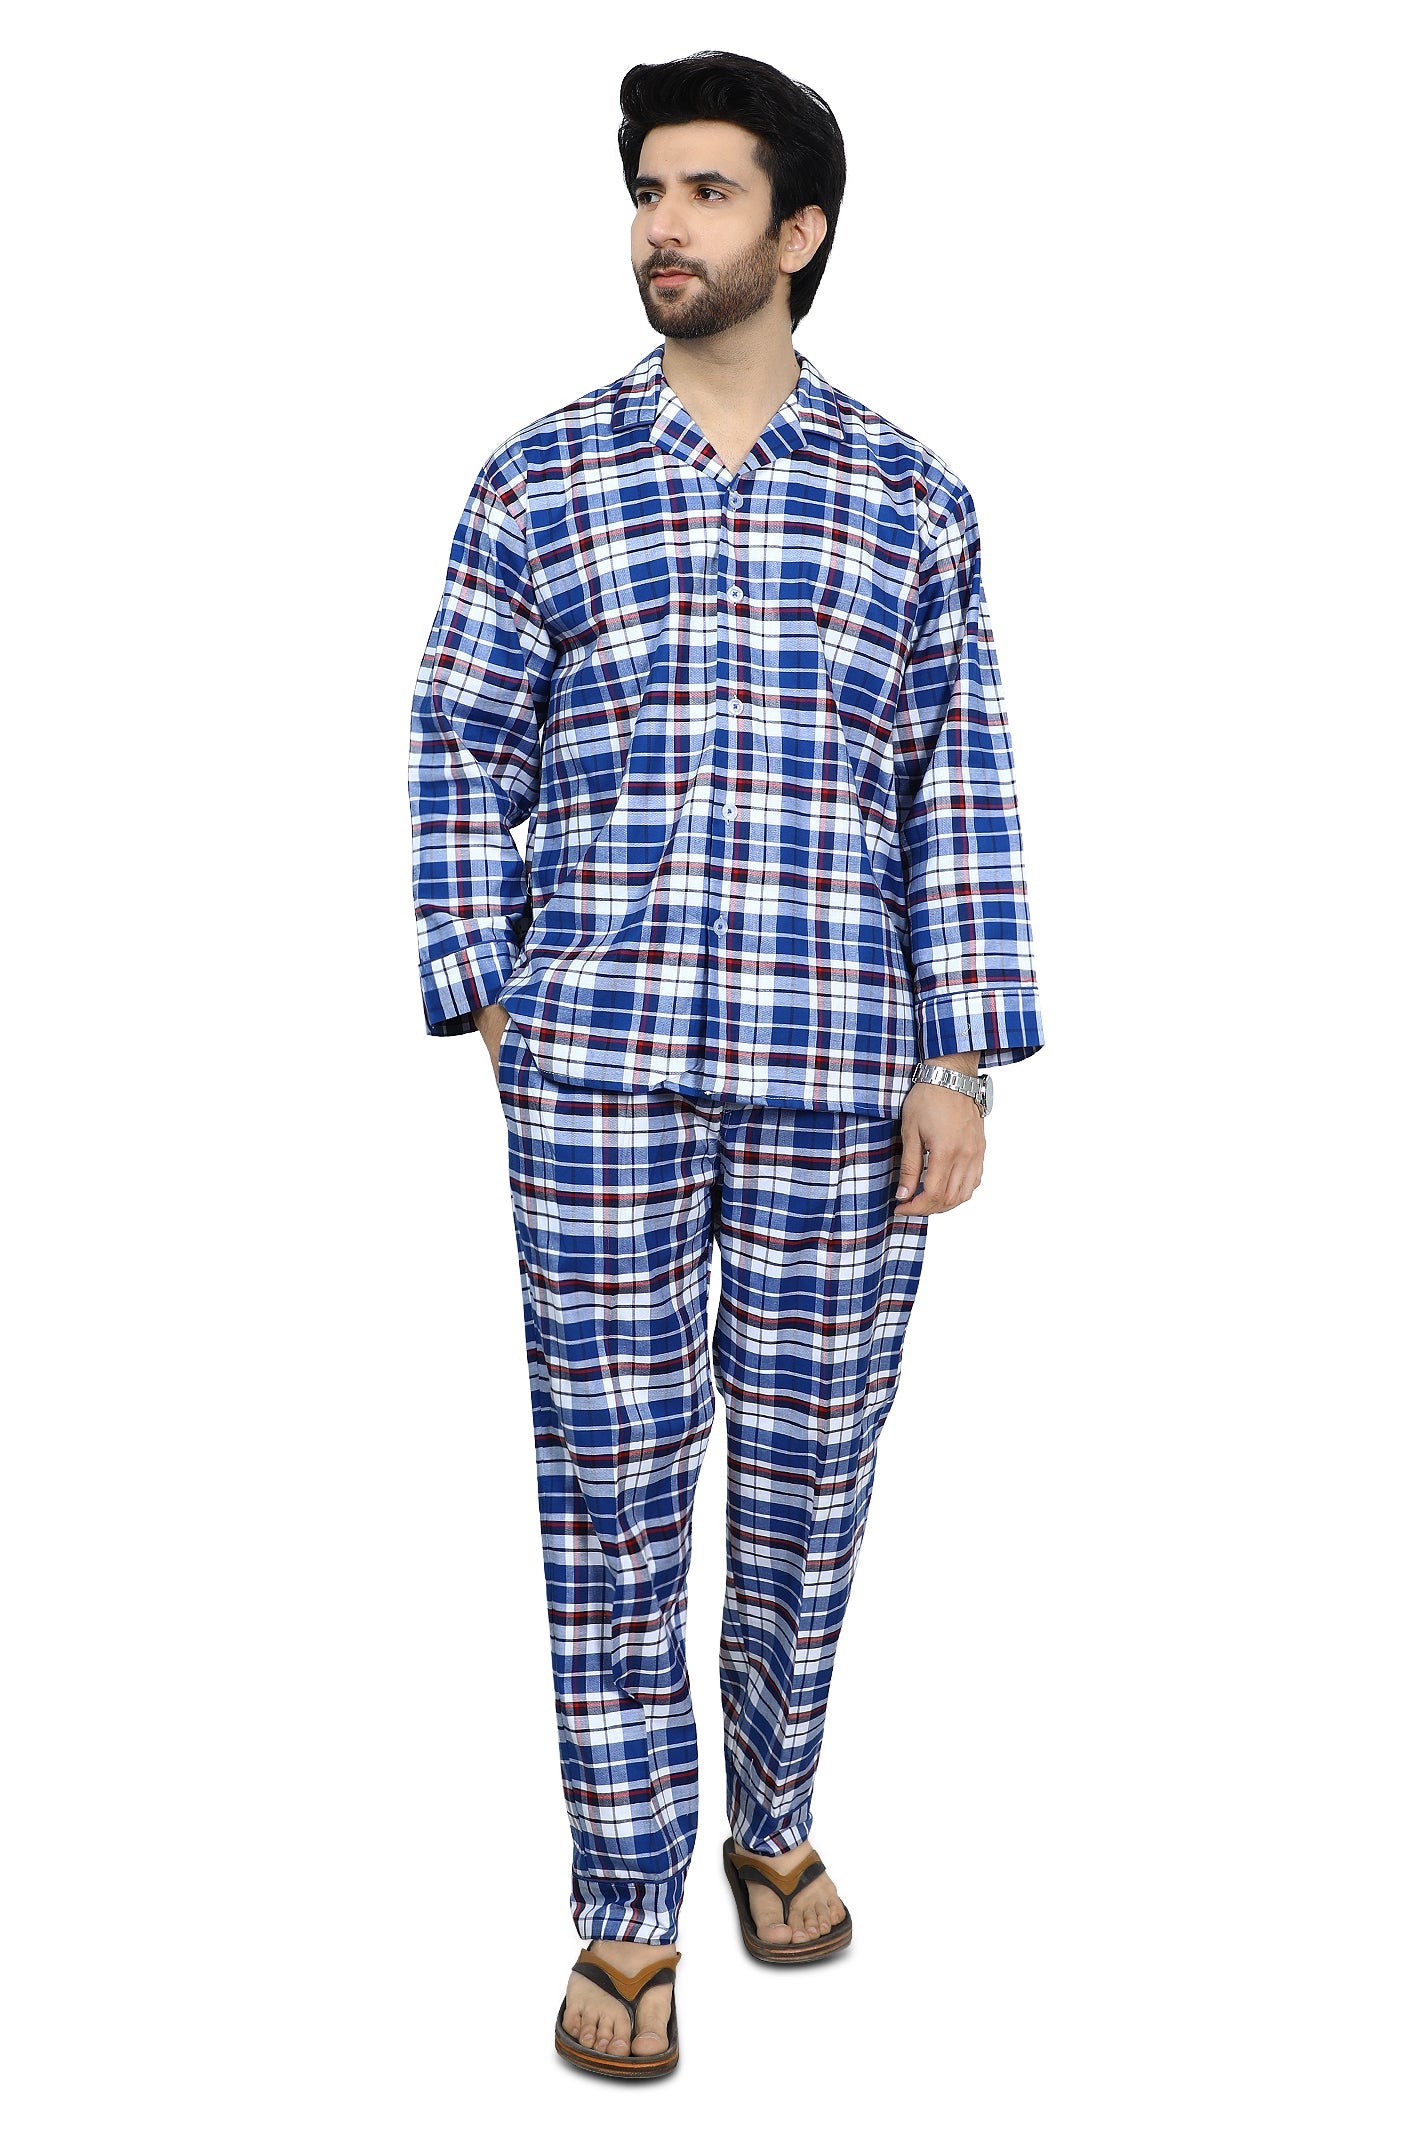 Diner's Night Suit for Men SKU: FNS017-MULTI - Diners